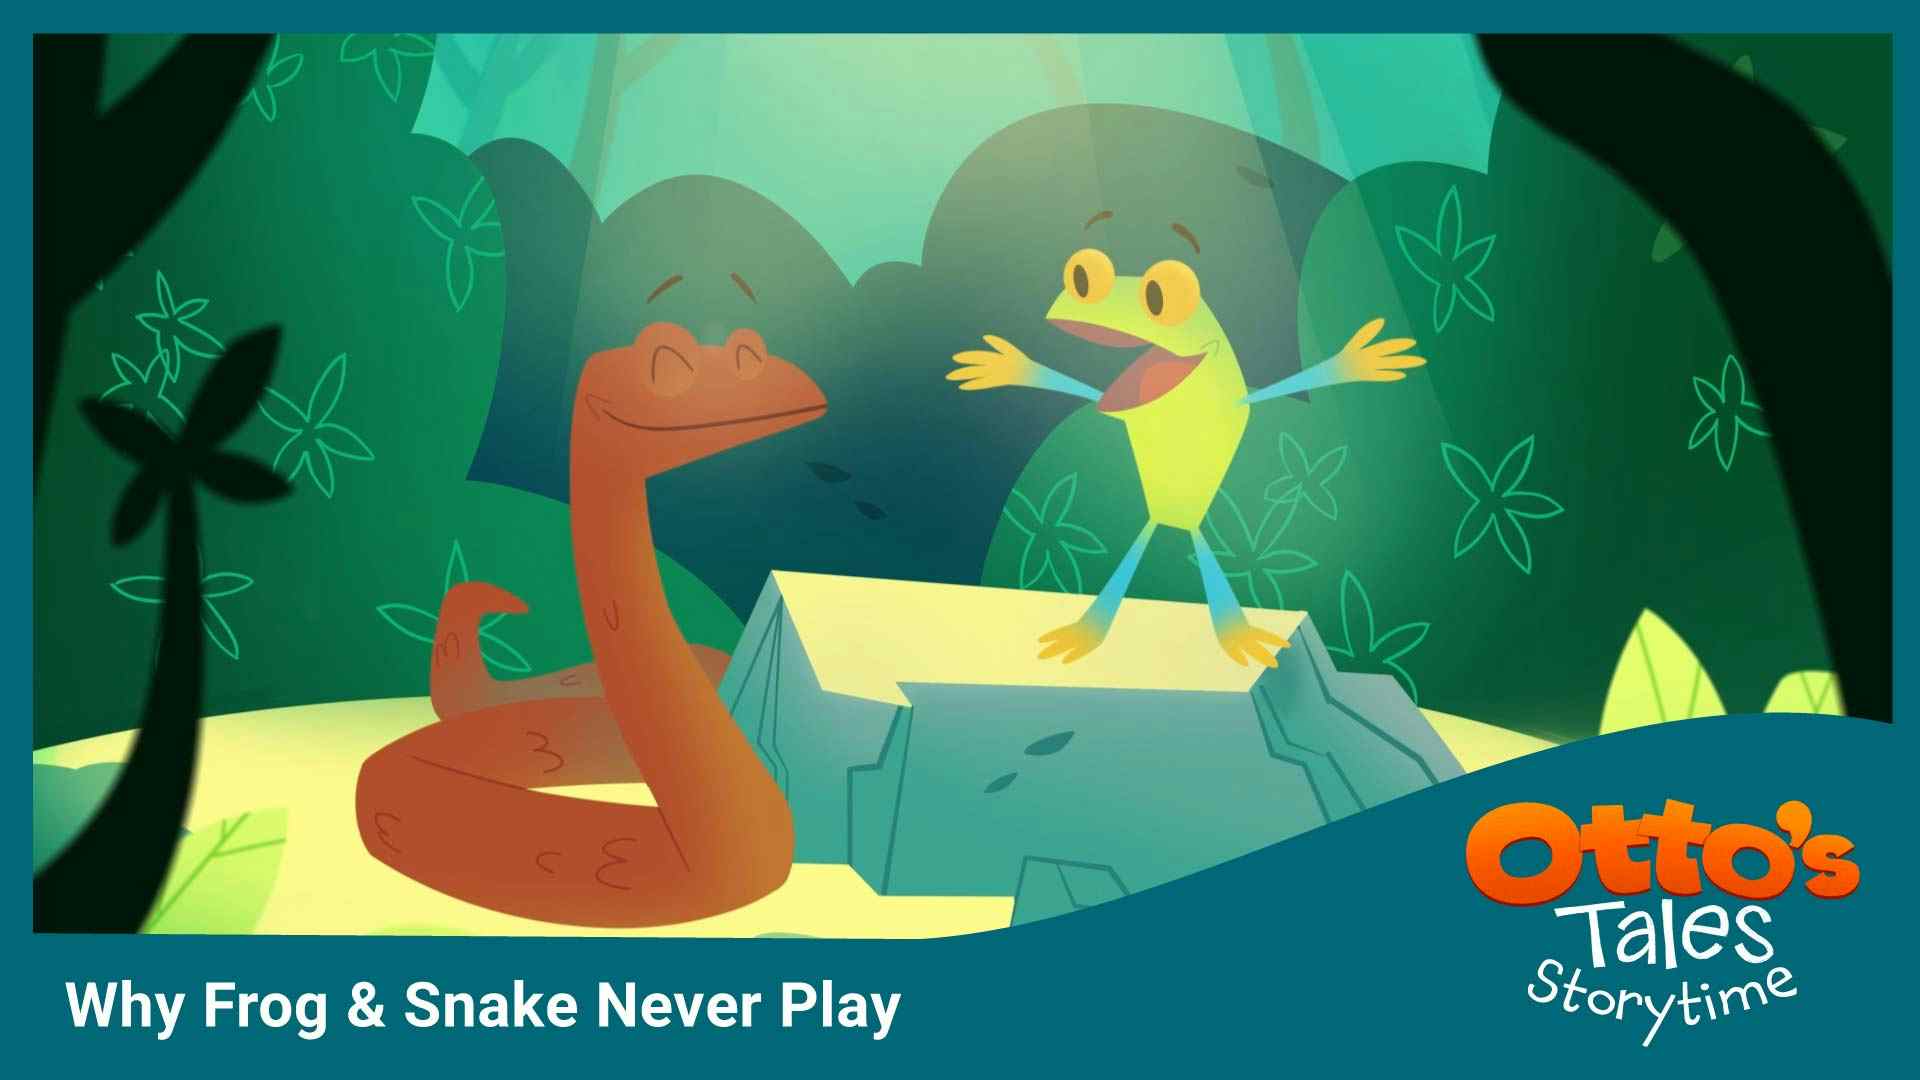 Why Frog & Snake Never Play